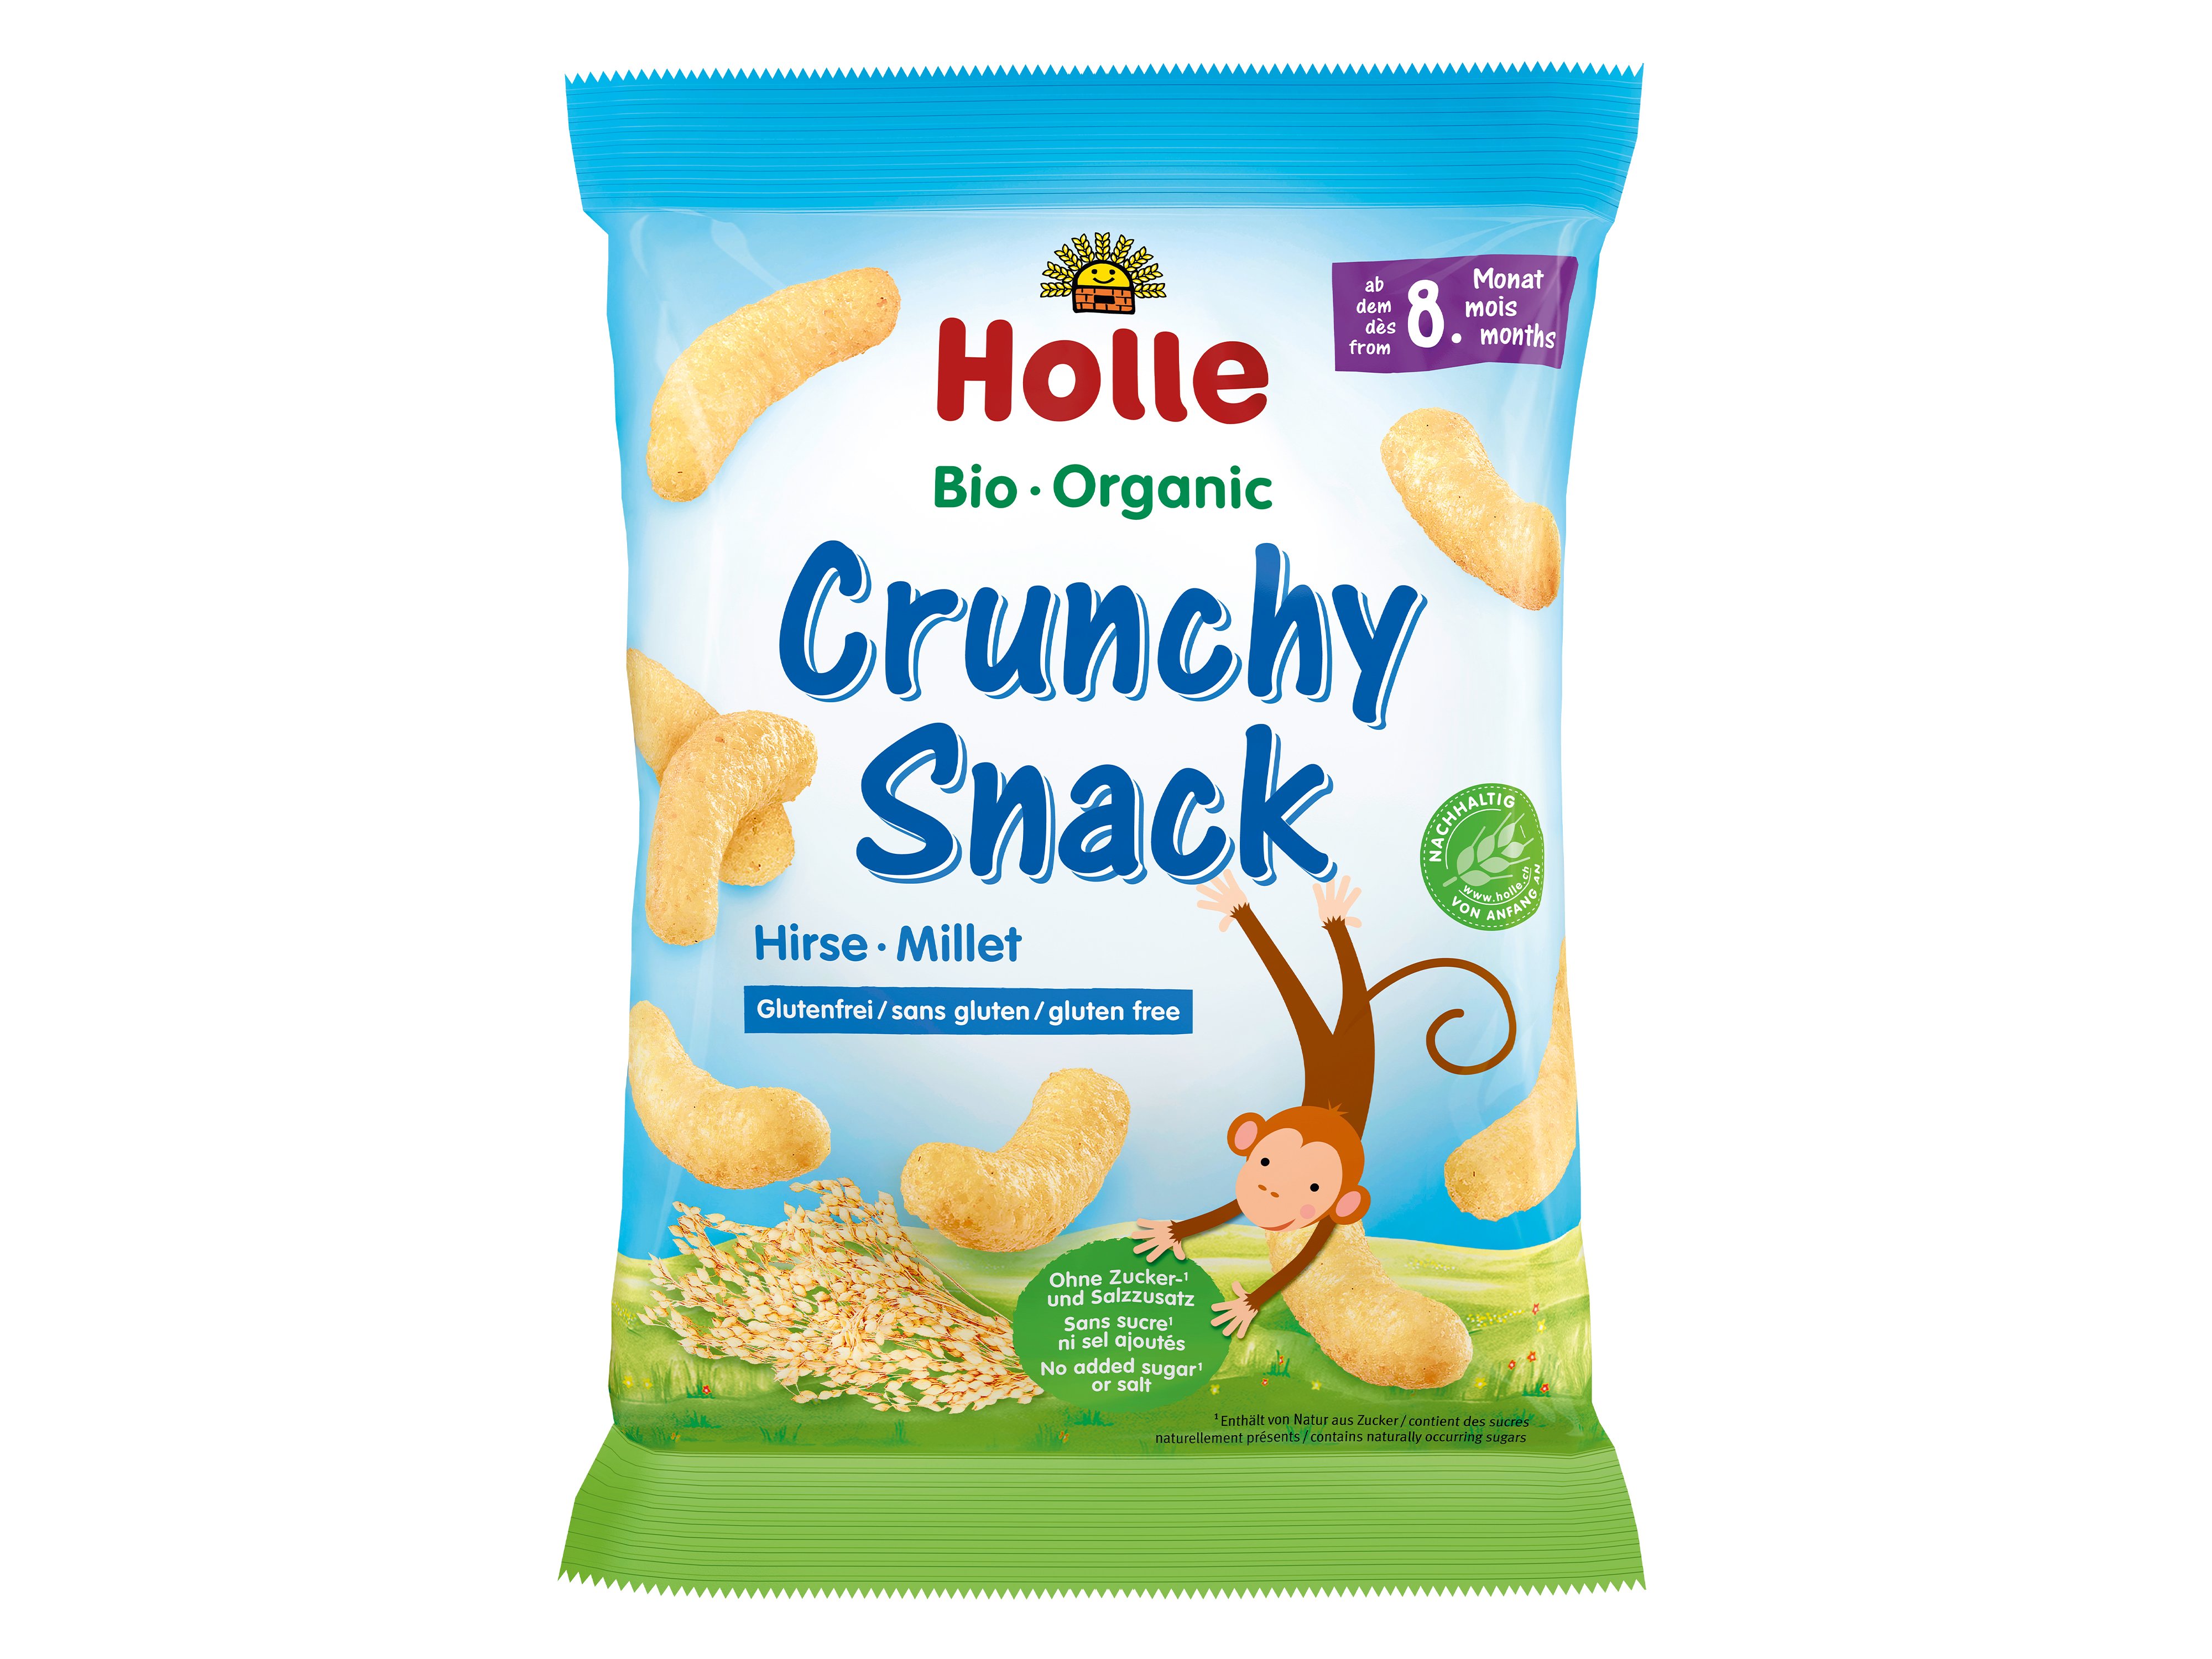 Holle Puffet Hirse Snack, 25 gram